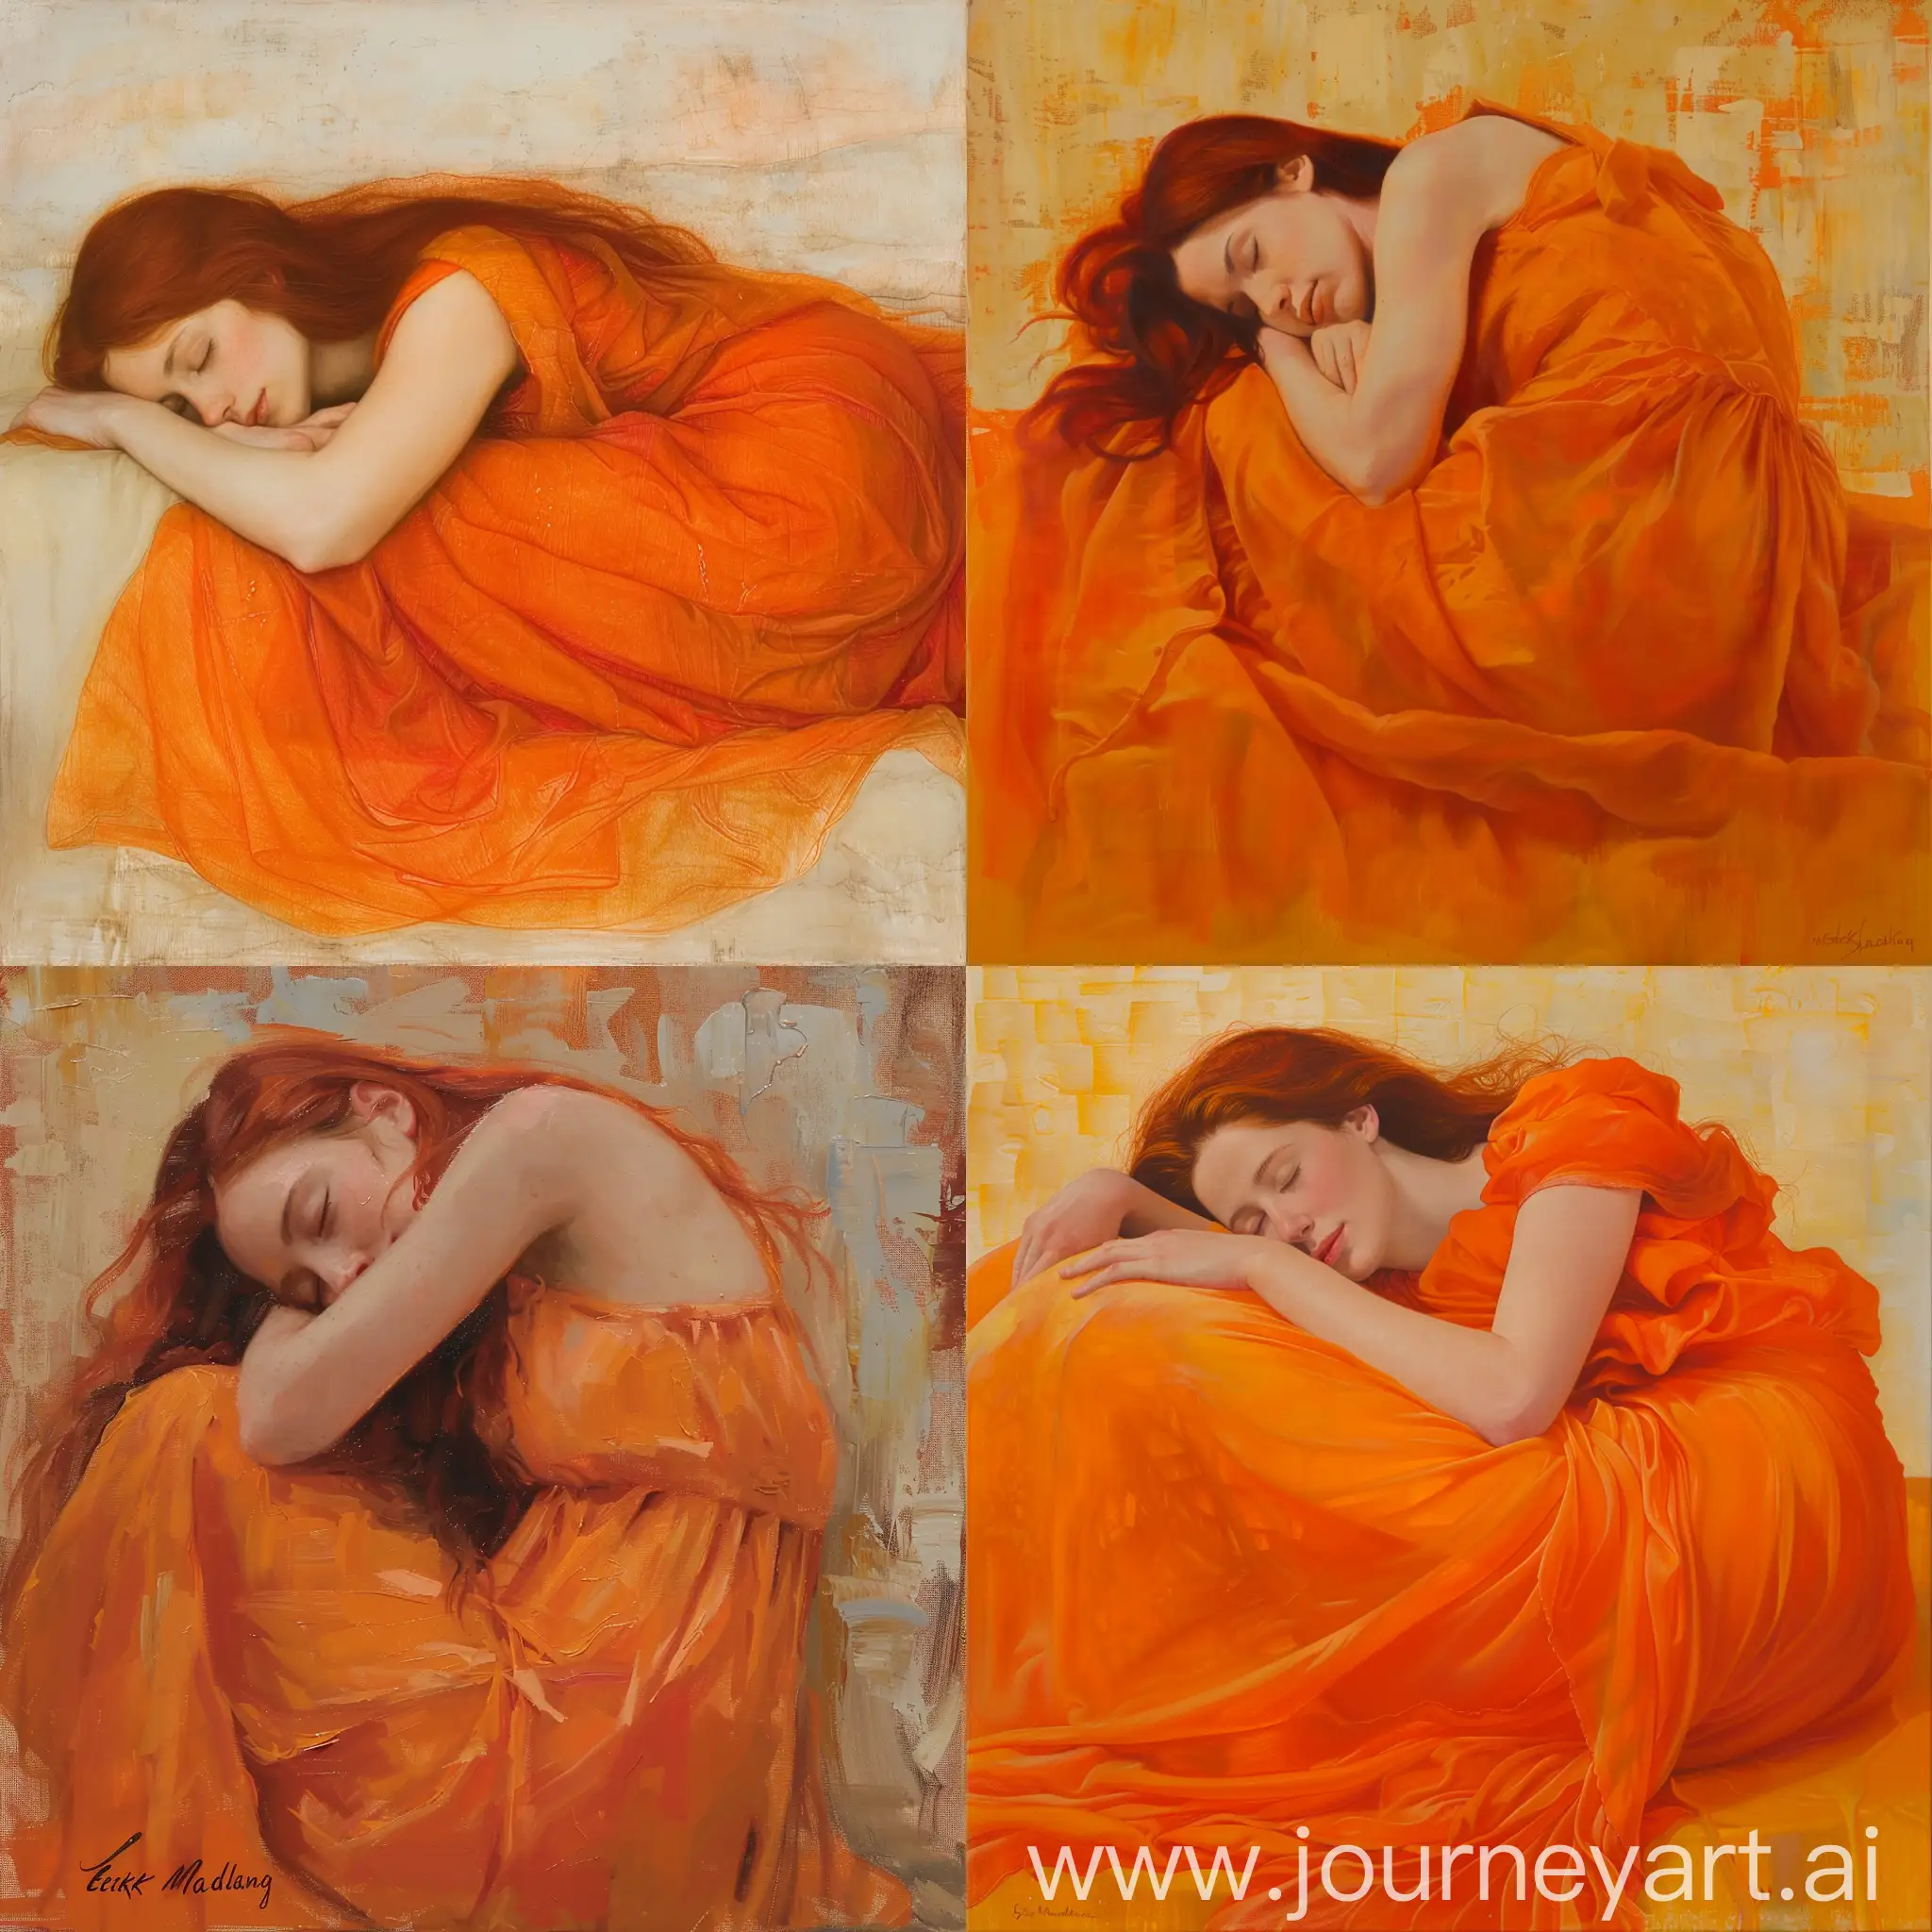 A woman sleeps, she is curled in on herself, head resting delicately in one arm, her hair is long and red, her body swathed in a diaphanous orange gown providing sufficient coverage and saturation to make the canvas blaze.
in the style of Erick Madigan Heck --style raw